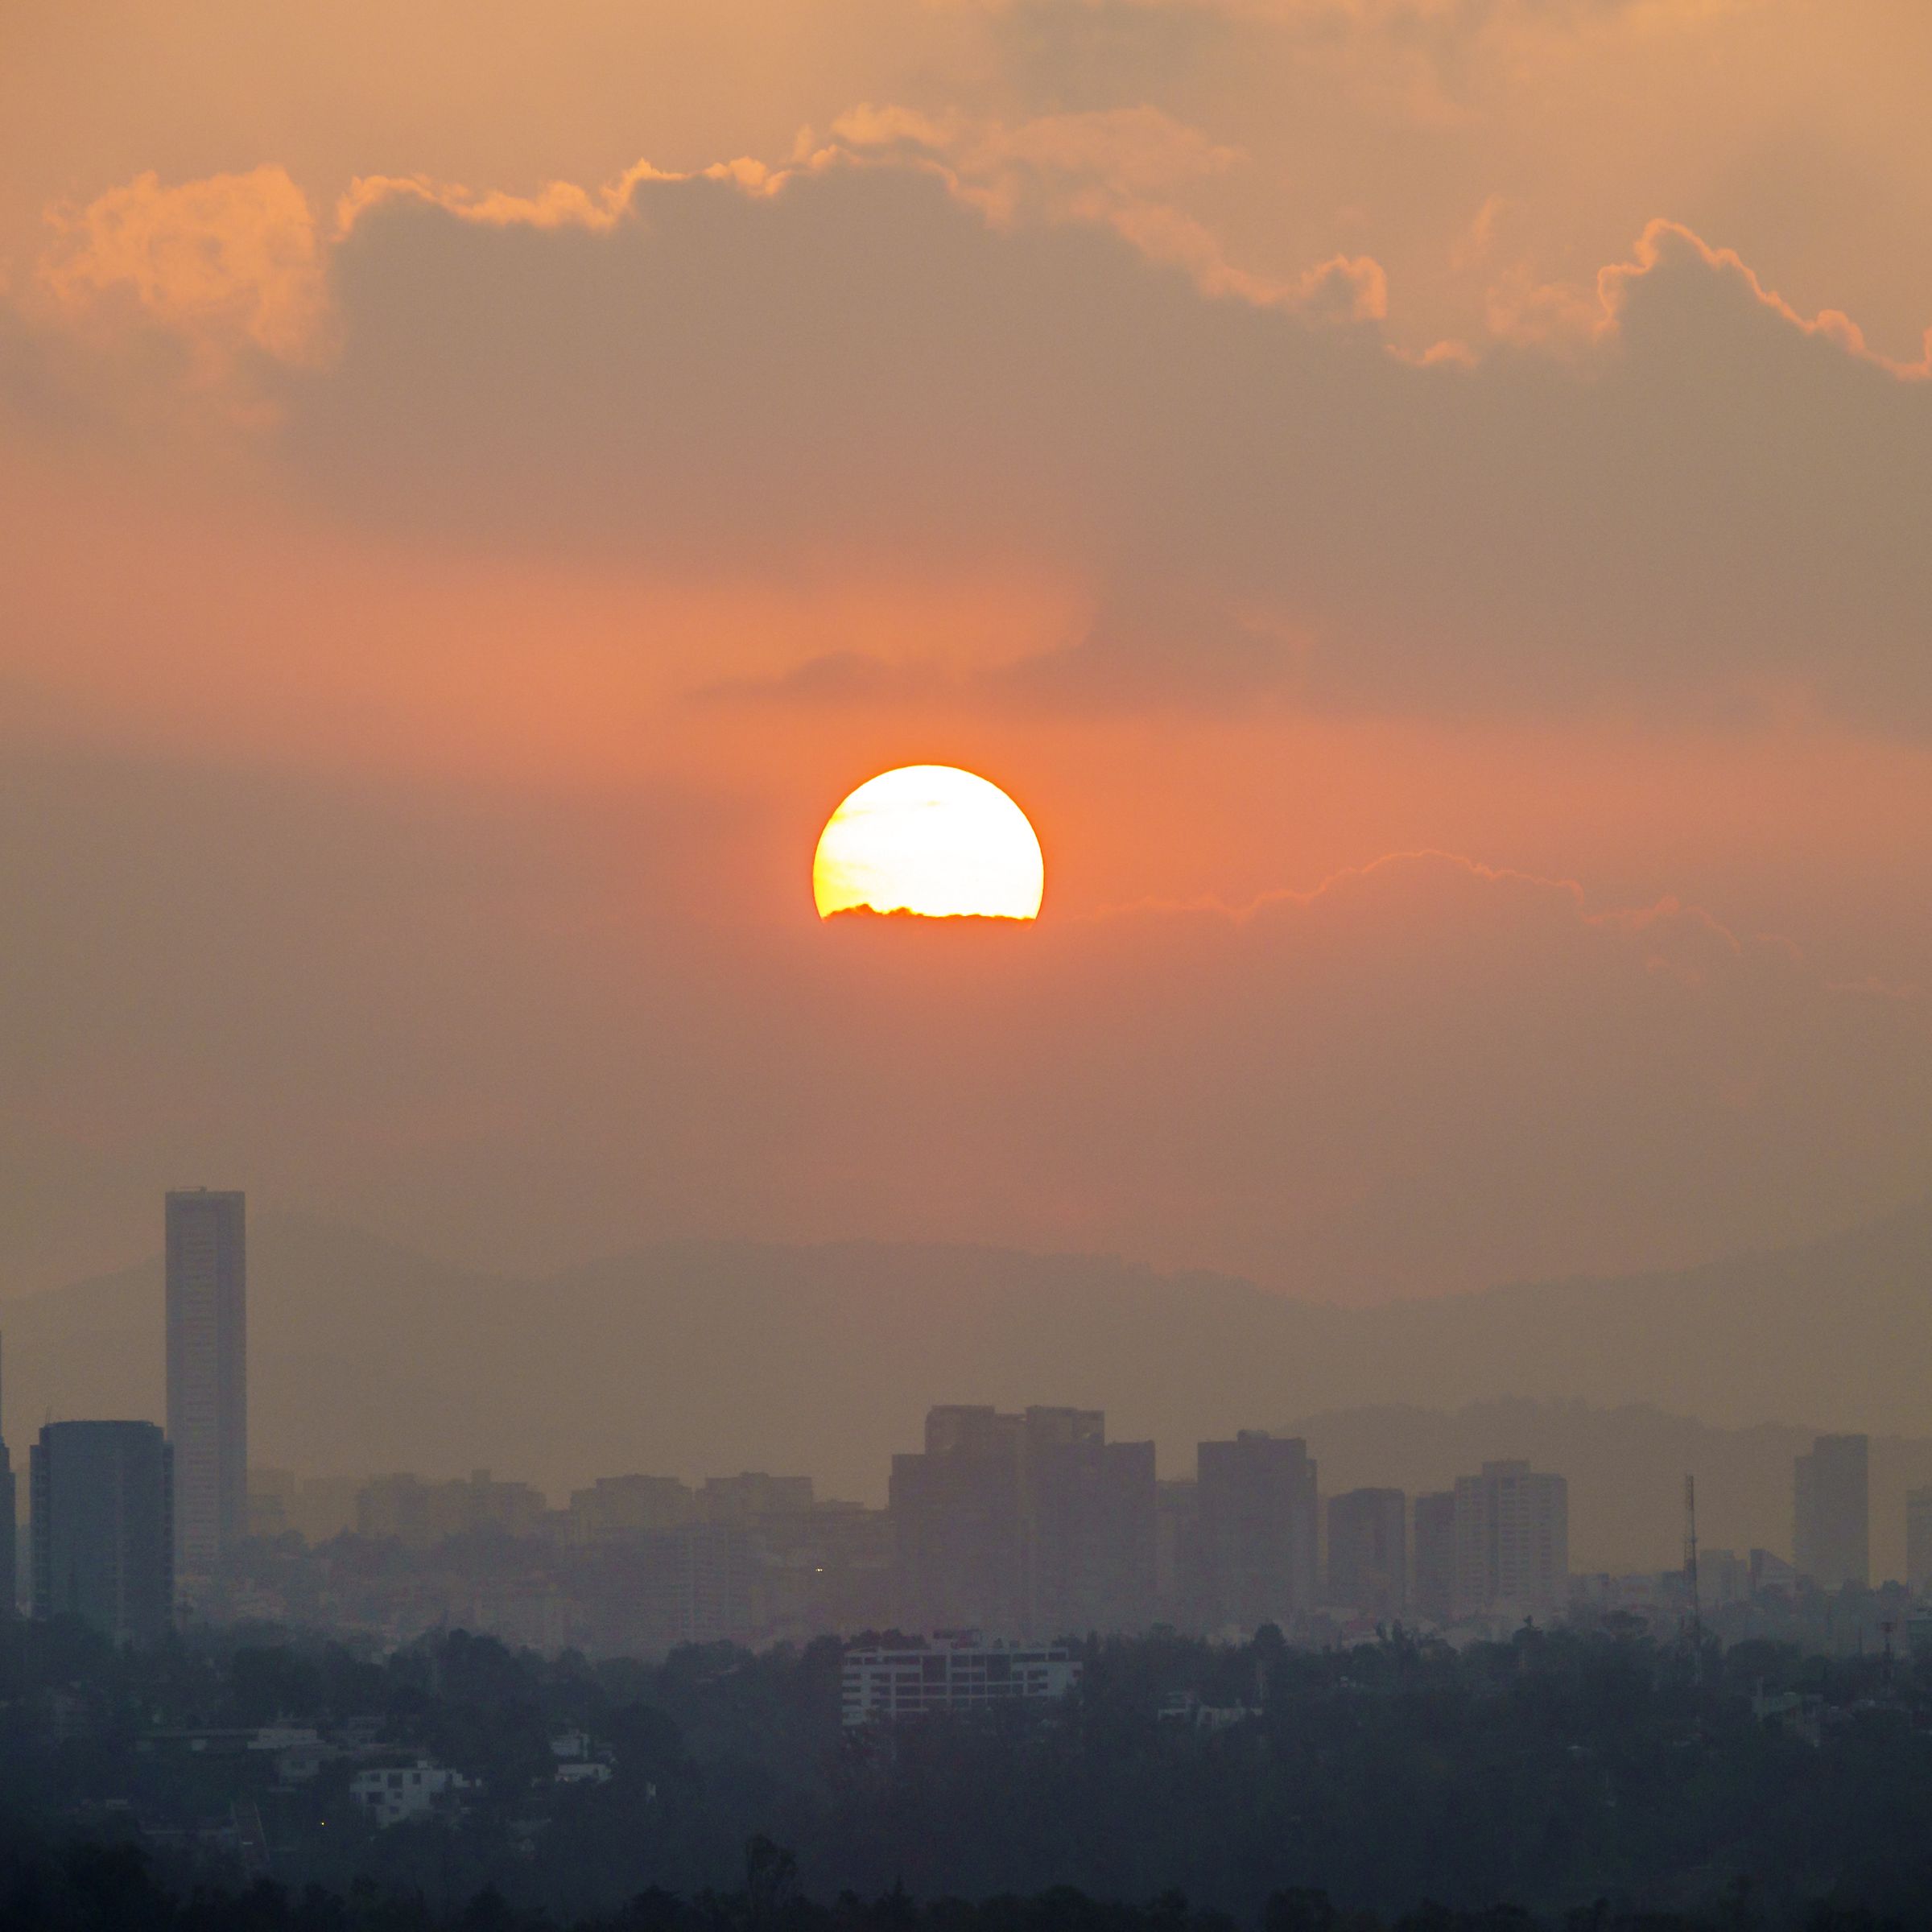 The city skyline at sunset, hazy with pollution.